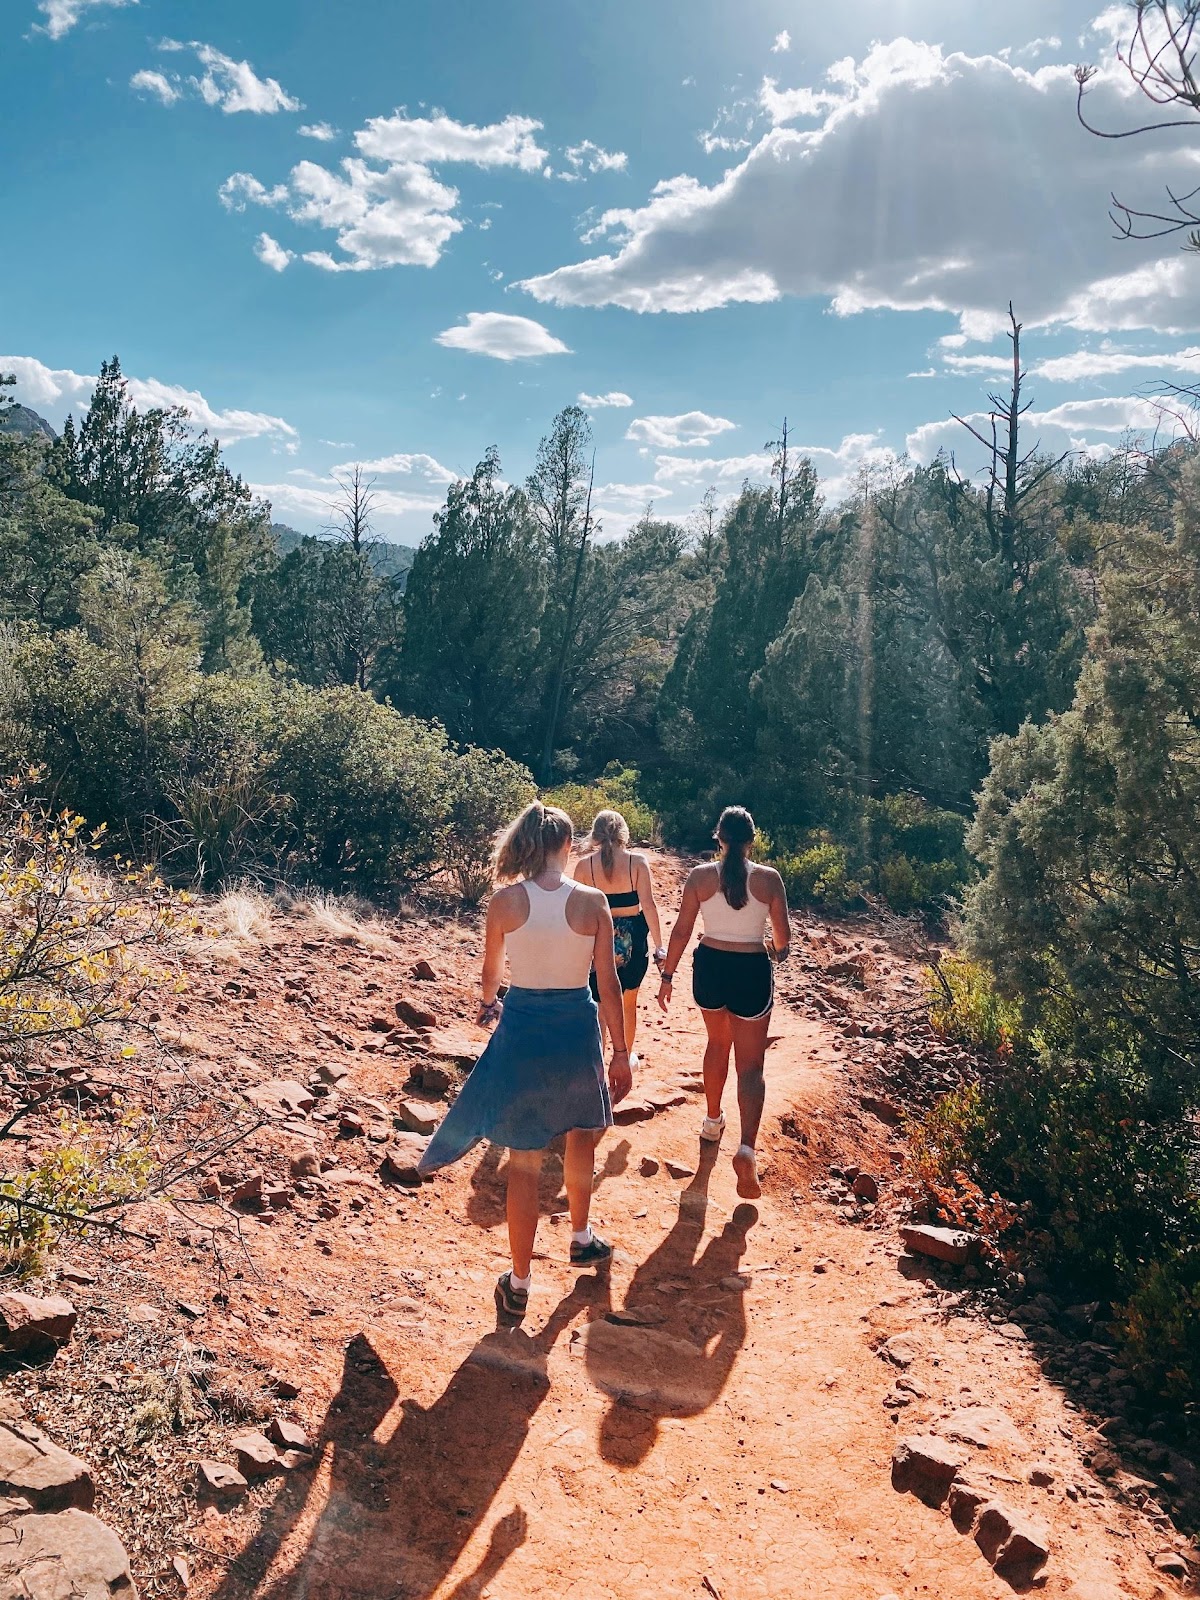 three young women hiking the Grand Canyon in shorts, tank tops, and hats. The sky is blue with a few white clouds.